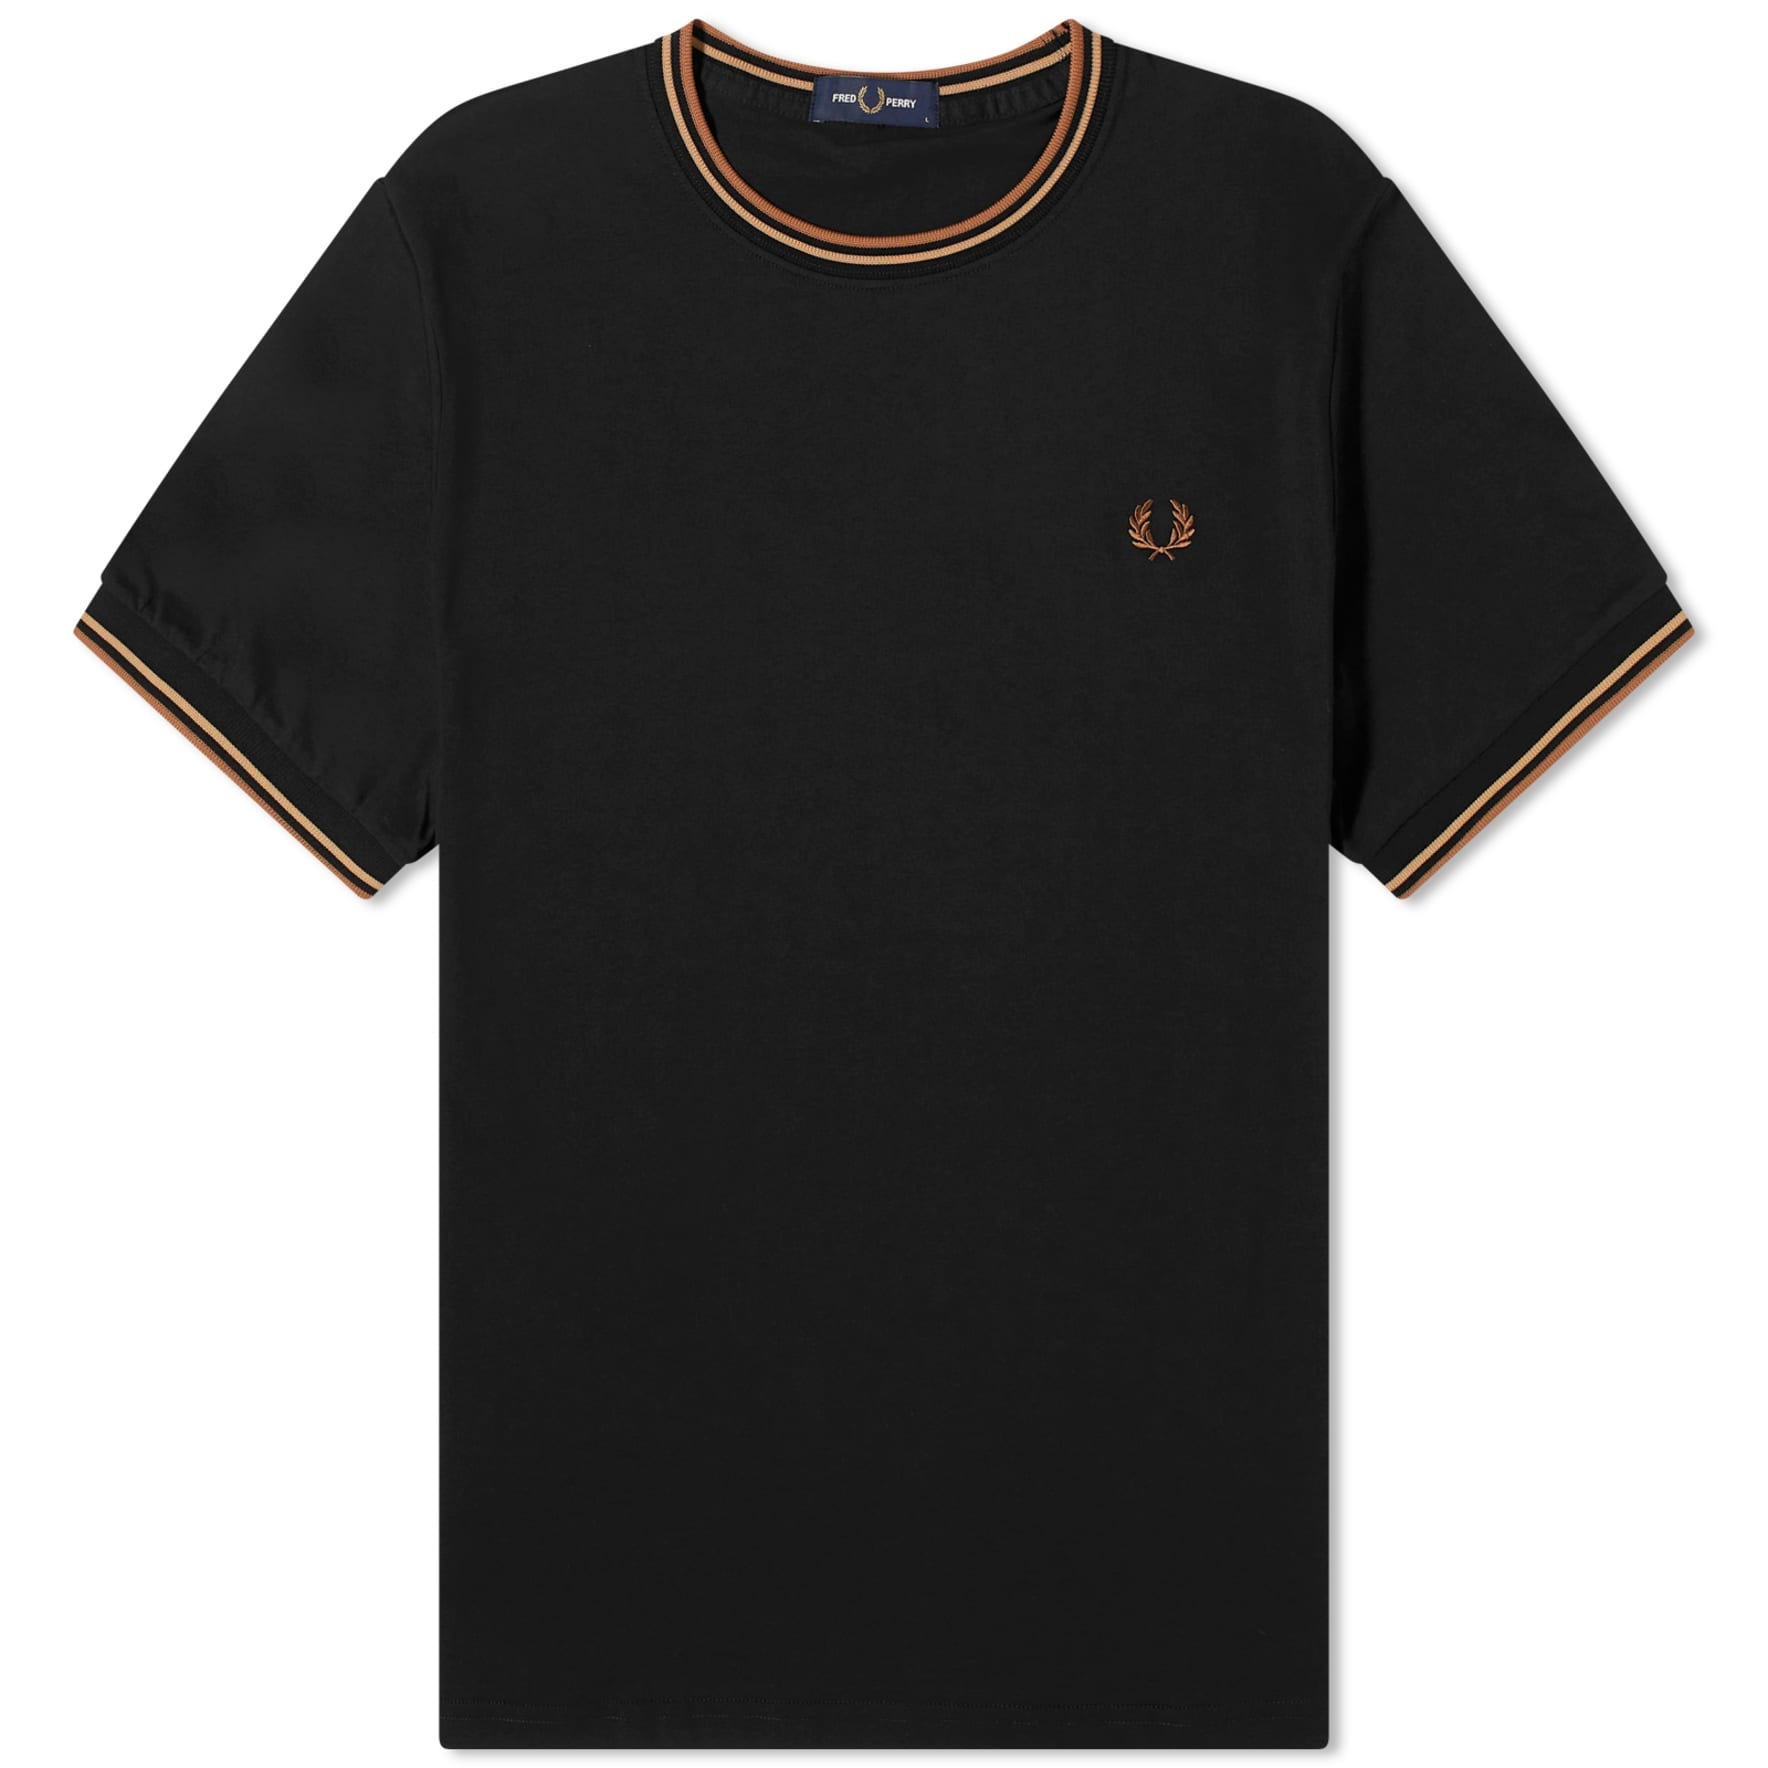 Футболка Fred Perry Twin Tipped, черный поло fred perry twin tipped цвет black snow